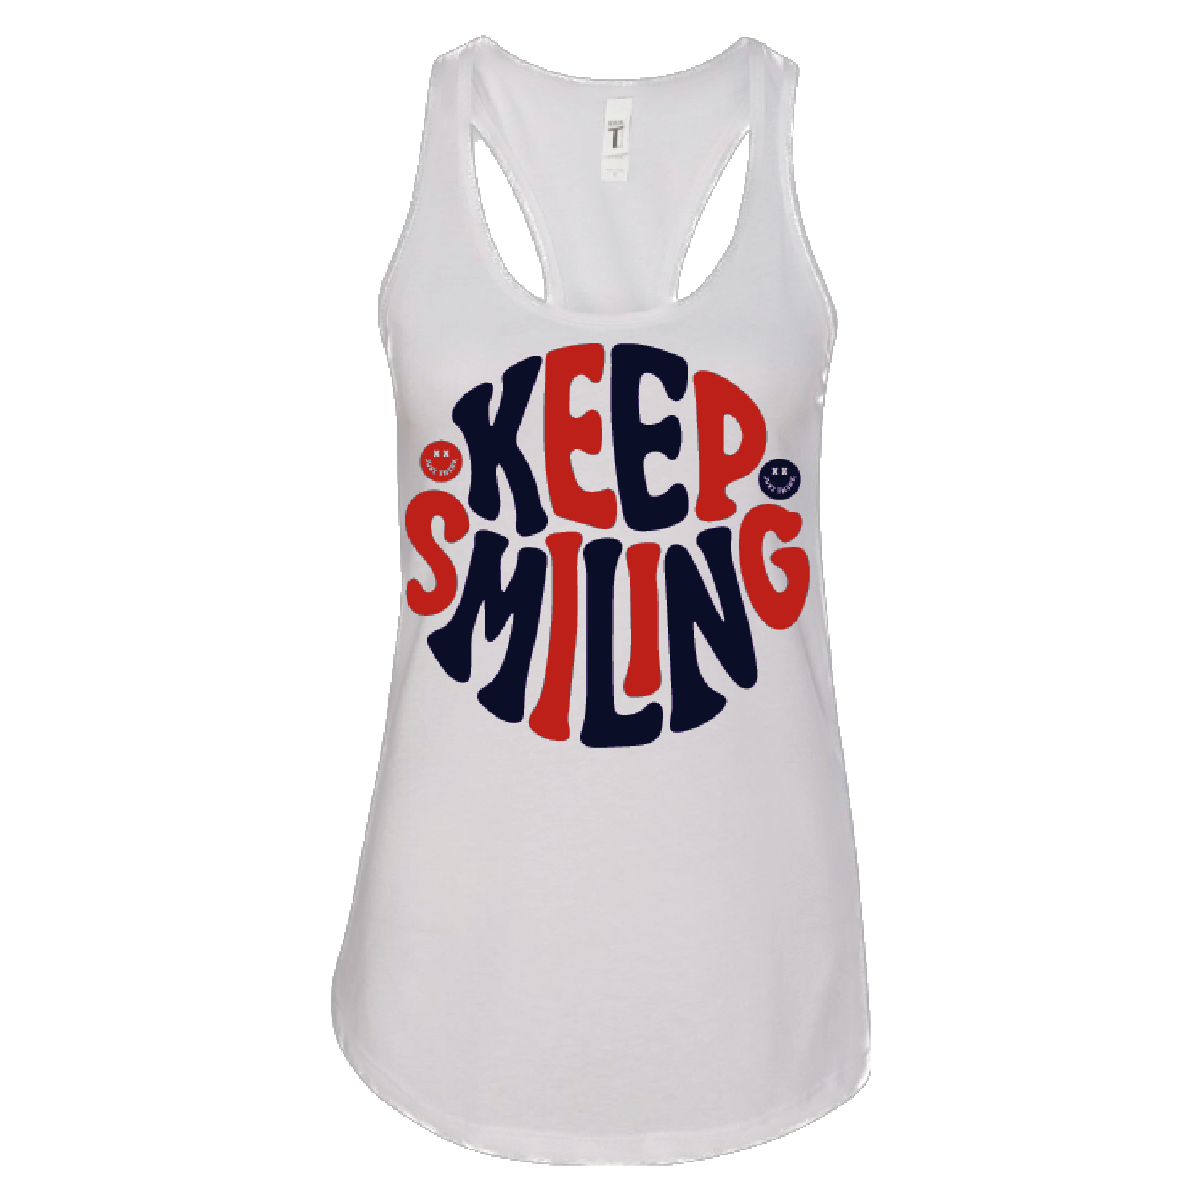 Keep Smiling Red White and Blue - Ladies Tank